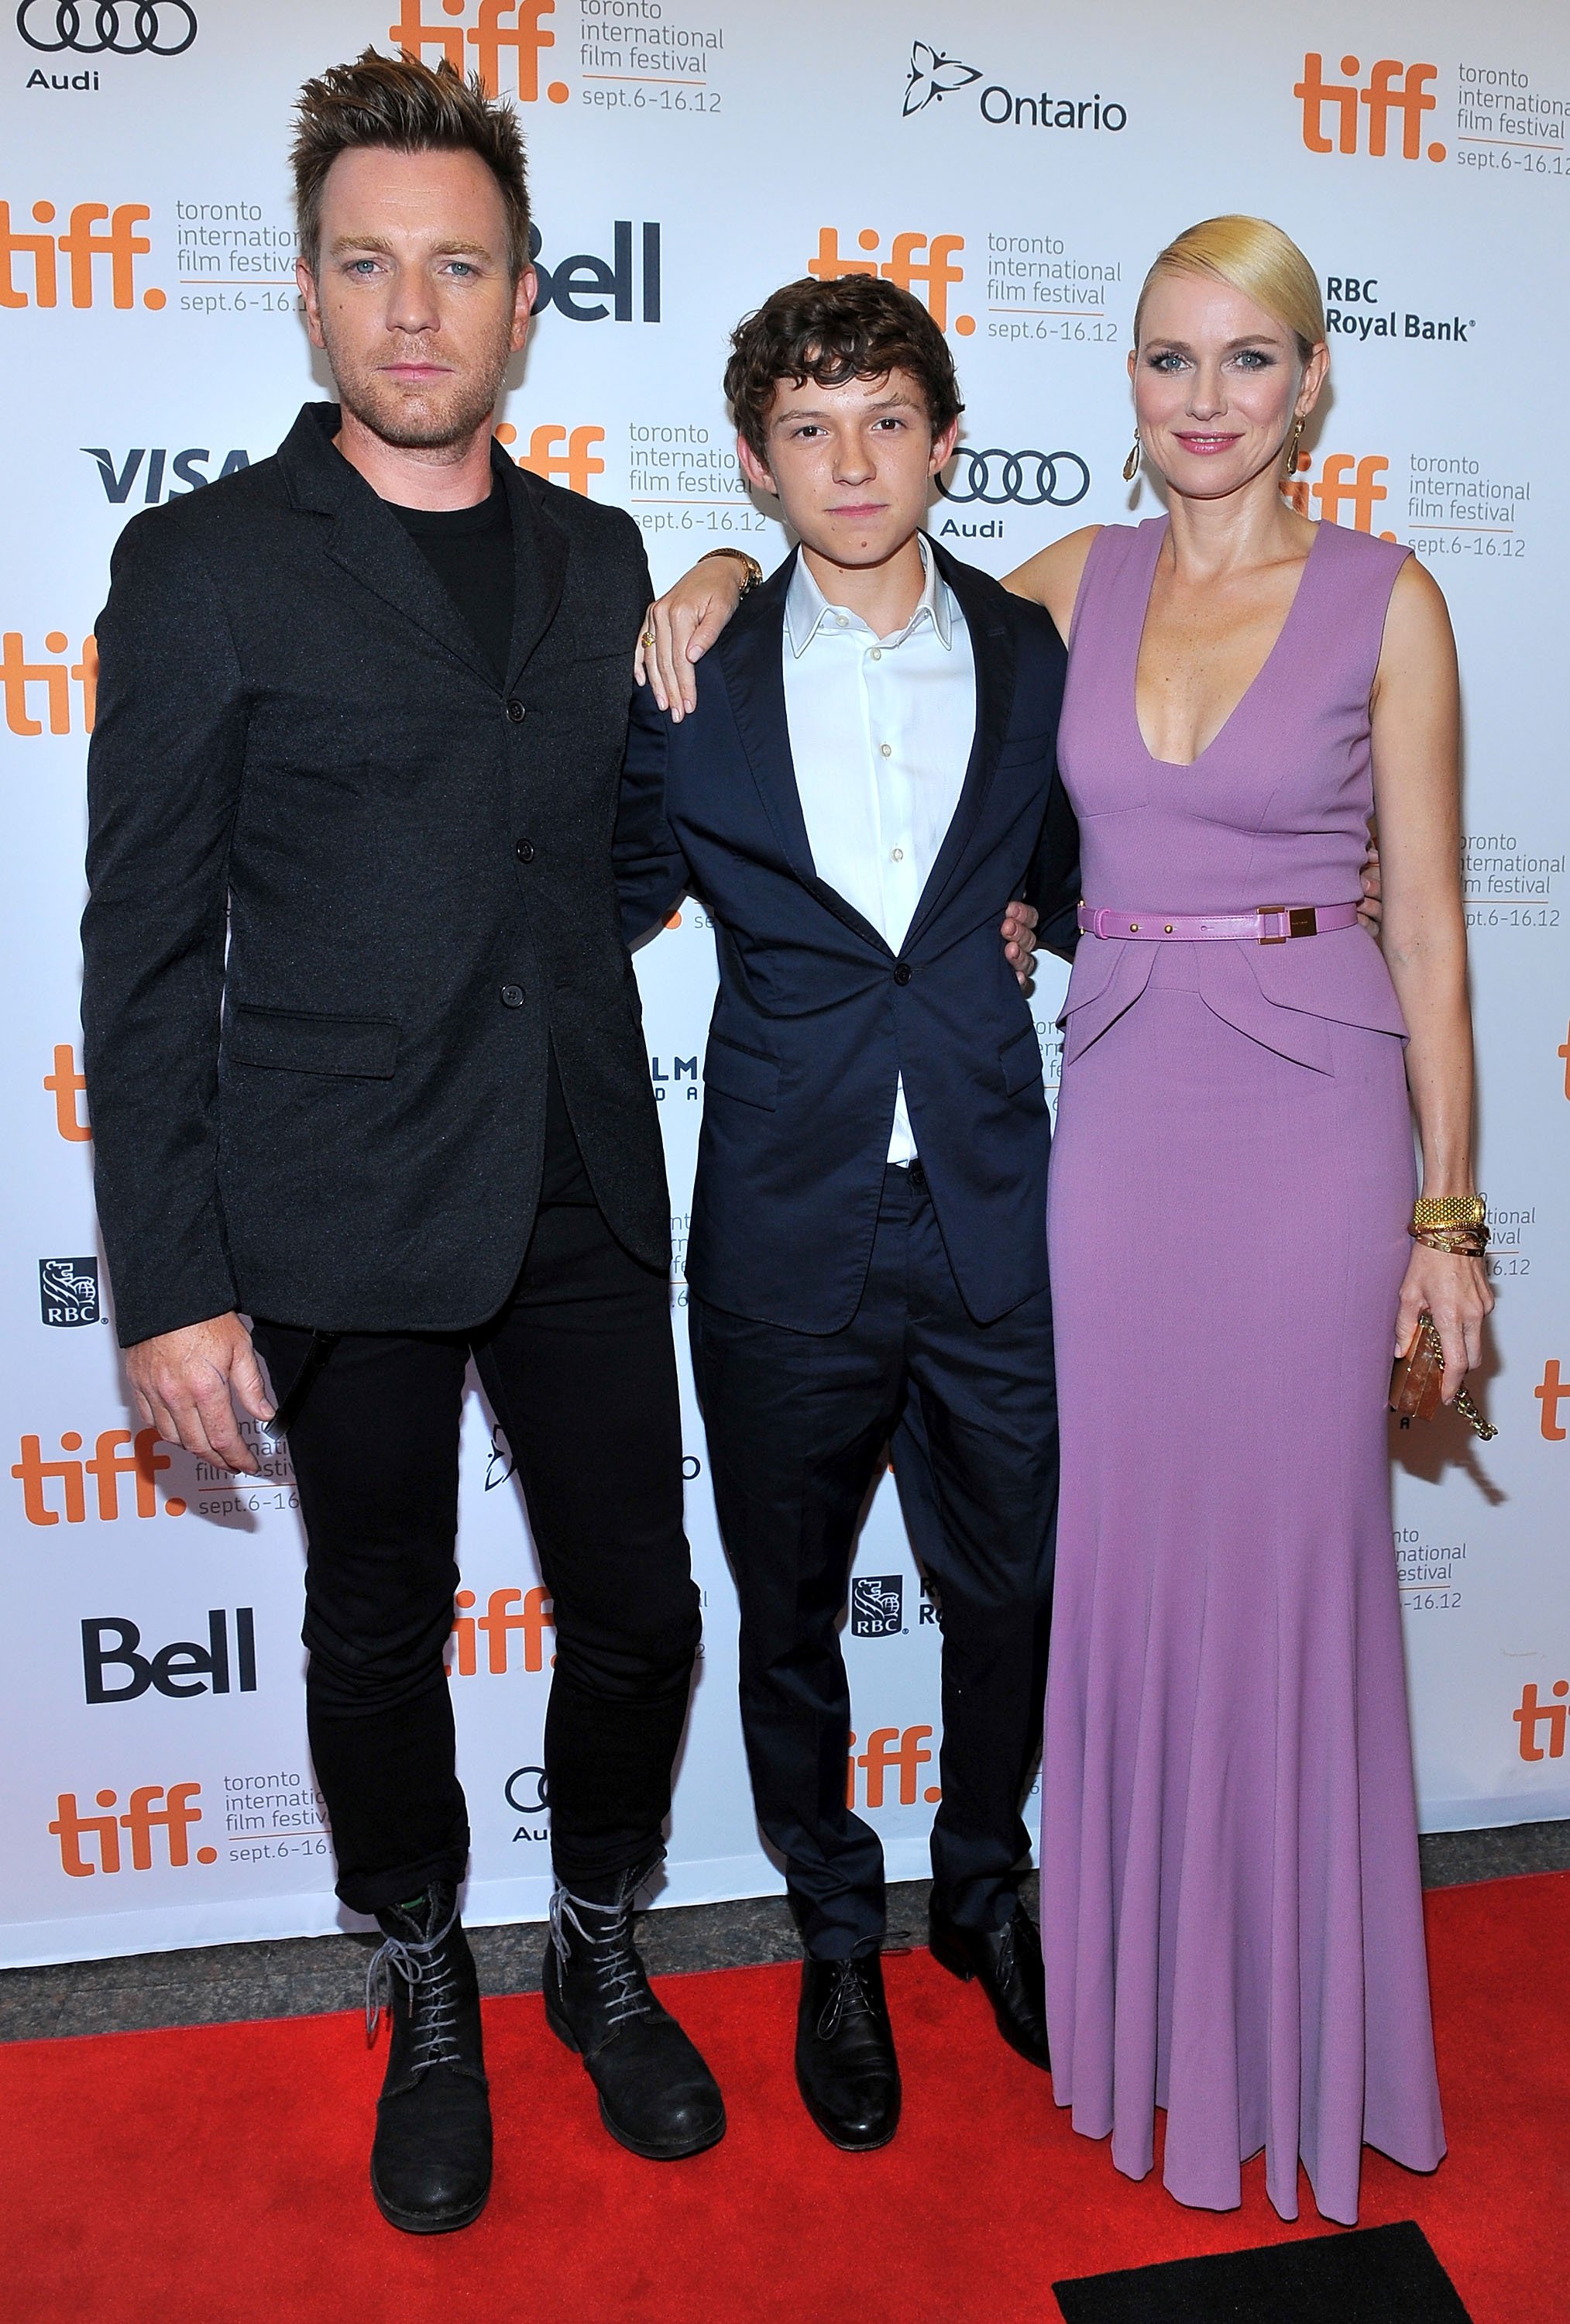 2012-09-09-TIFF-The-Impossible-Premiere-006.jpg